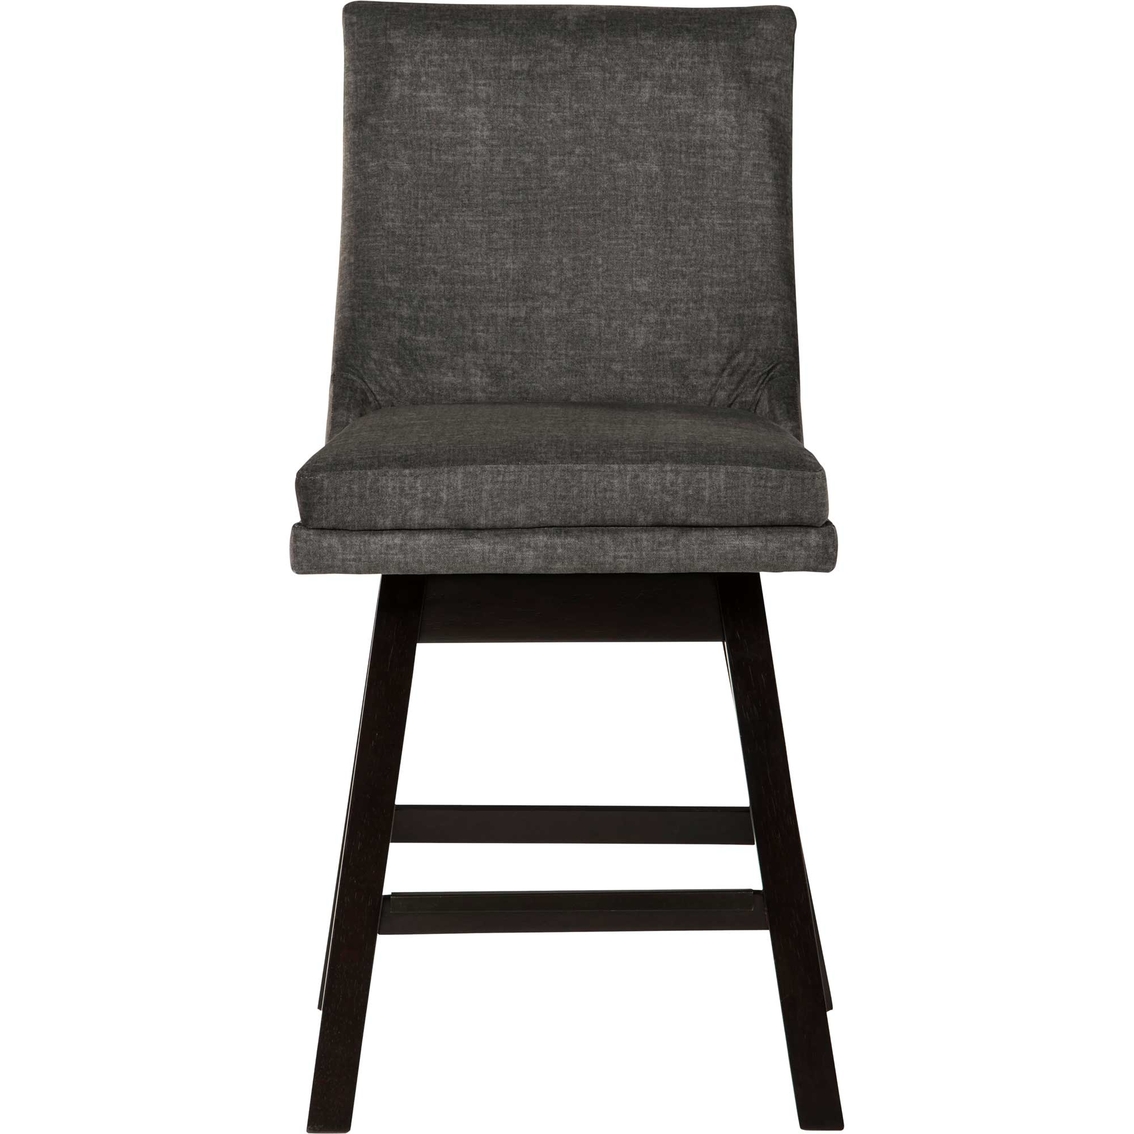 Signature Design by Ashley Tallenger Upholstered Swivel Counter Stool 2 pk. - Image 4 of 6